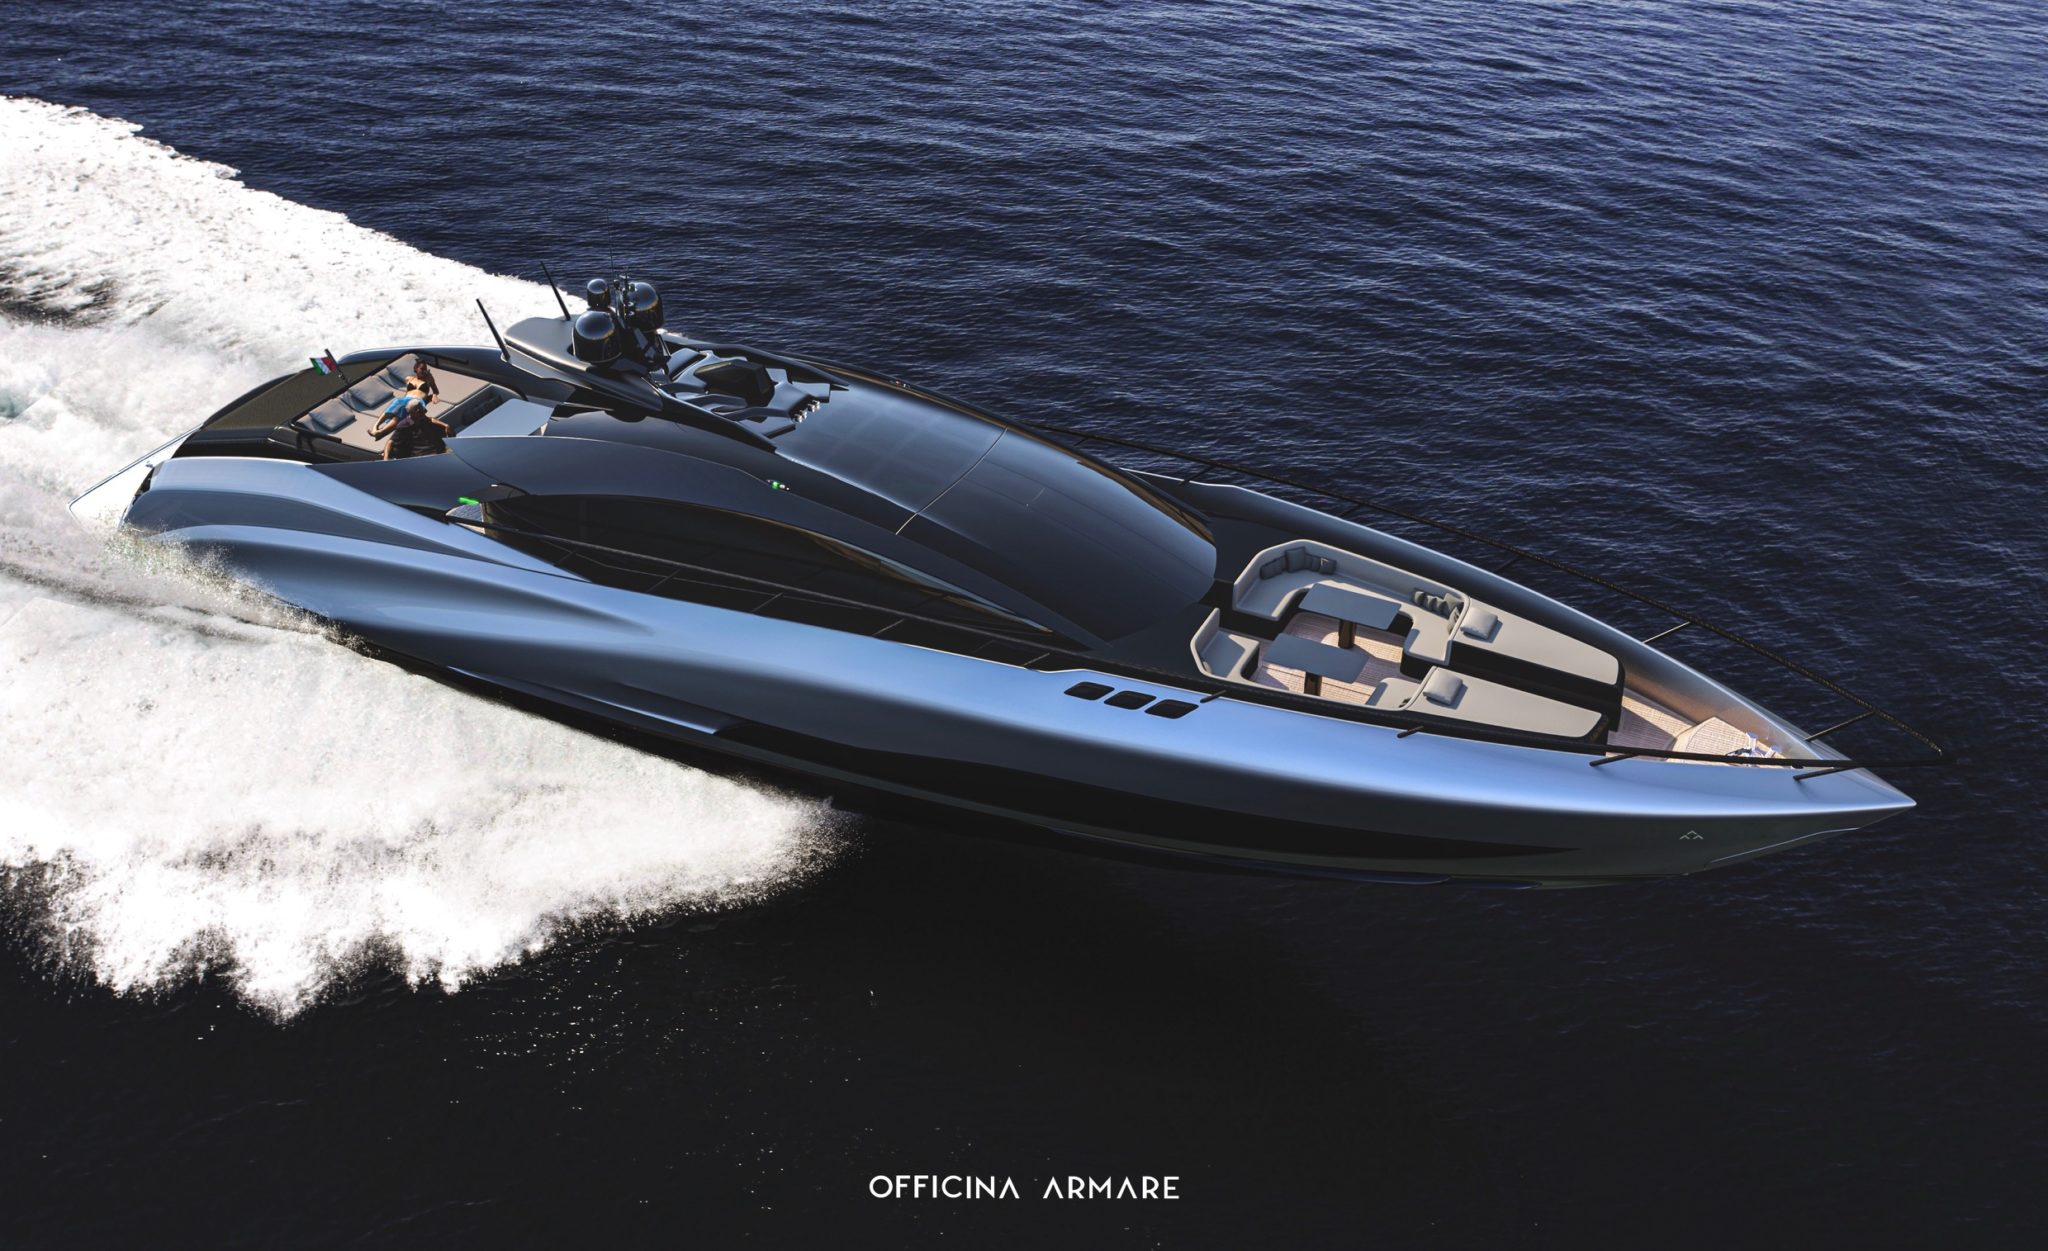 Milan-based yacht design studio Officina Armare drew heavily from supercars in designing the new A88 Gransport concept.